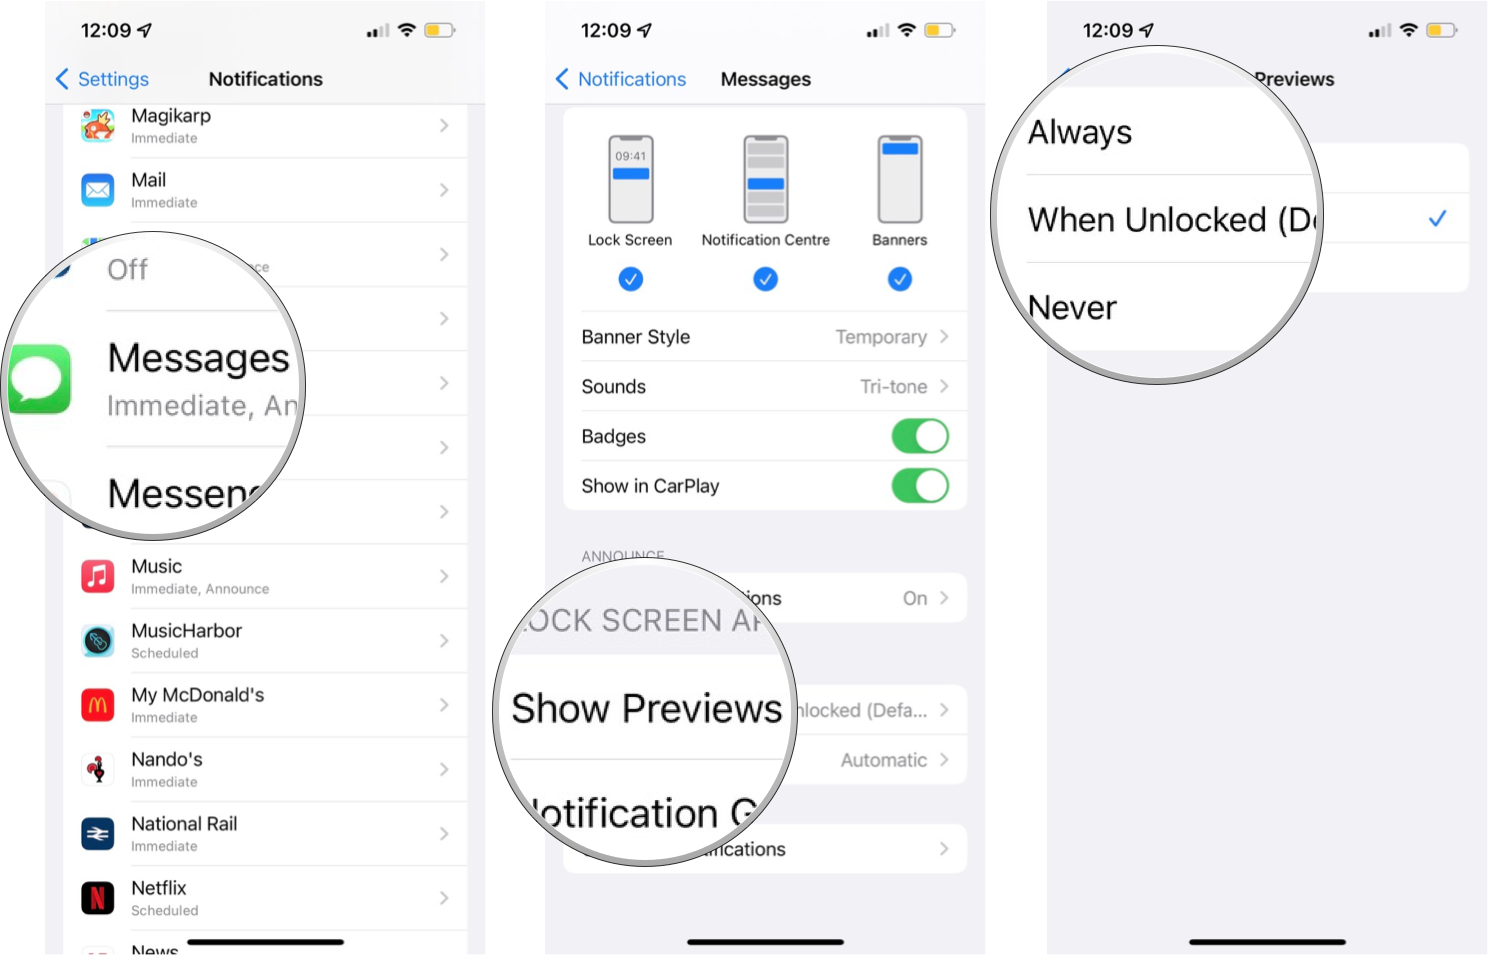 How to turn message previews on or off in iMessages for iPhone and iPad: Tap Messages, tap Show Previews, tap the option you'd like